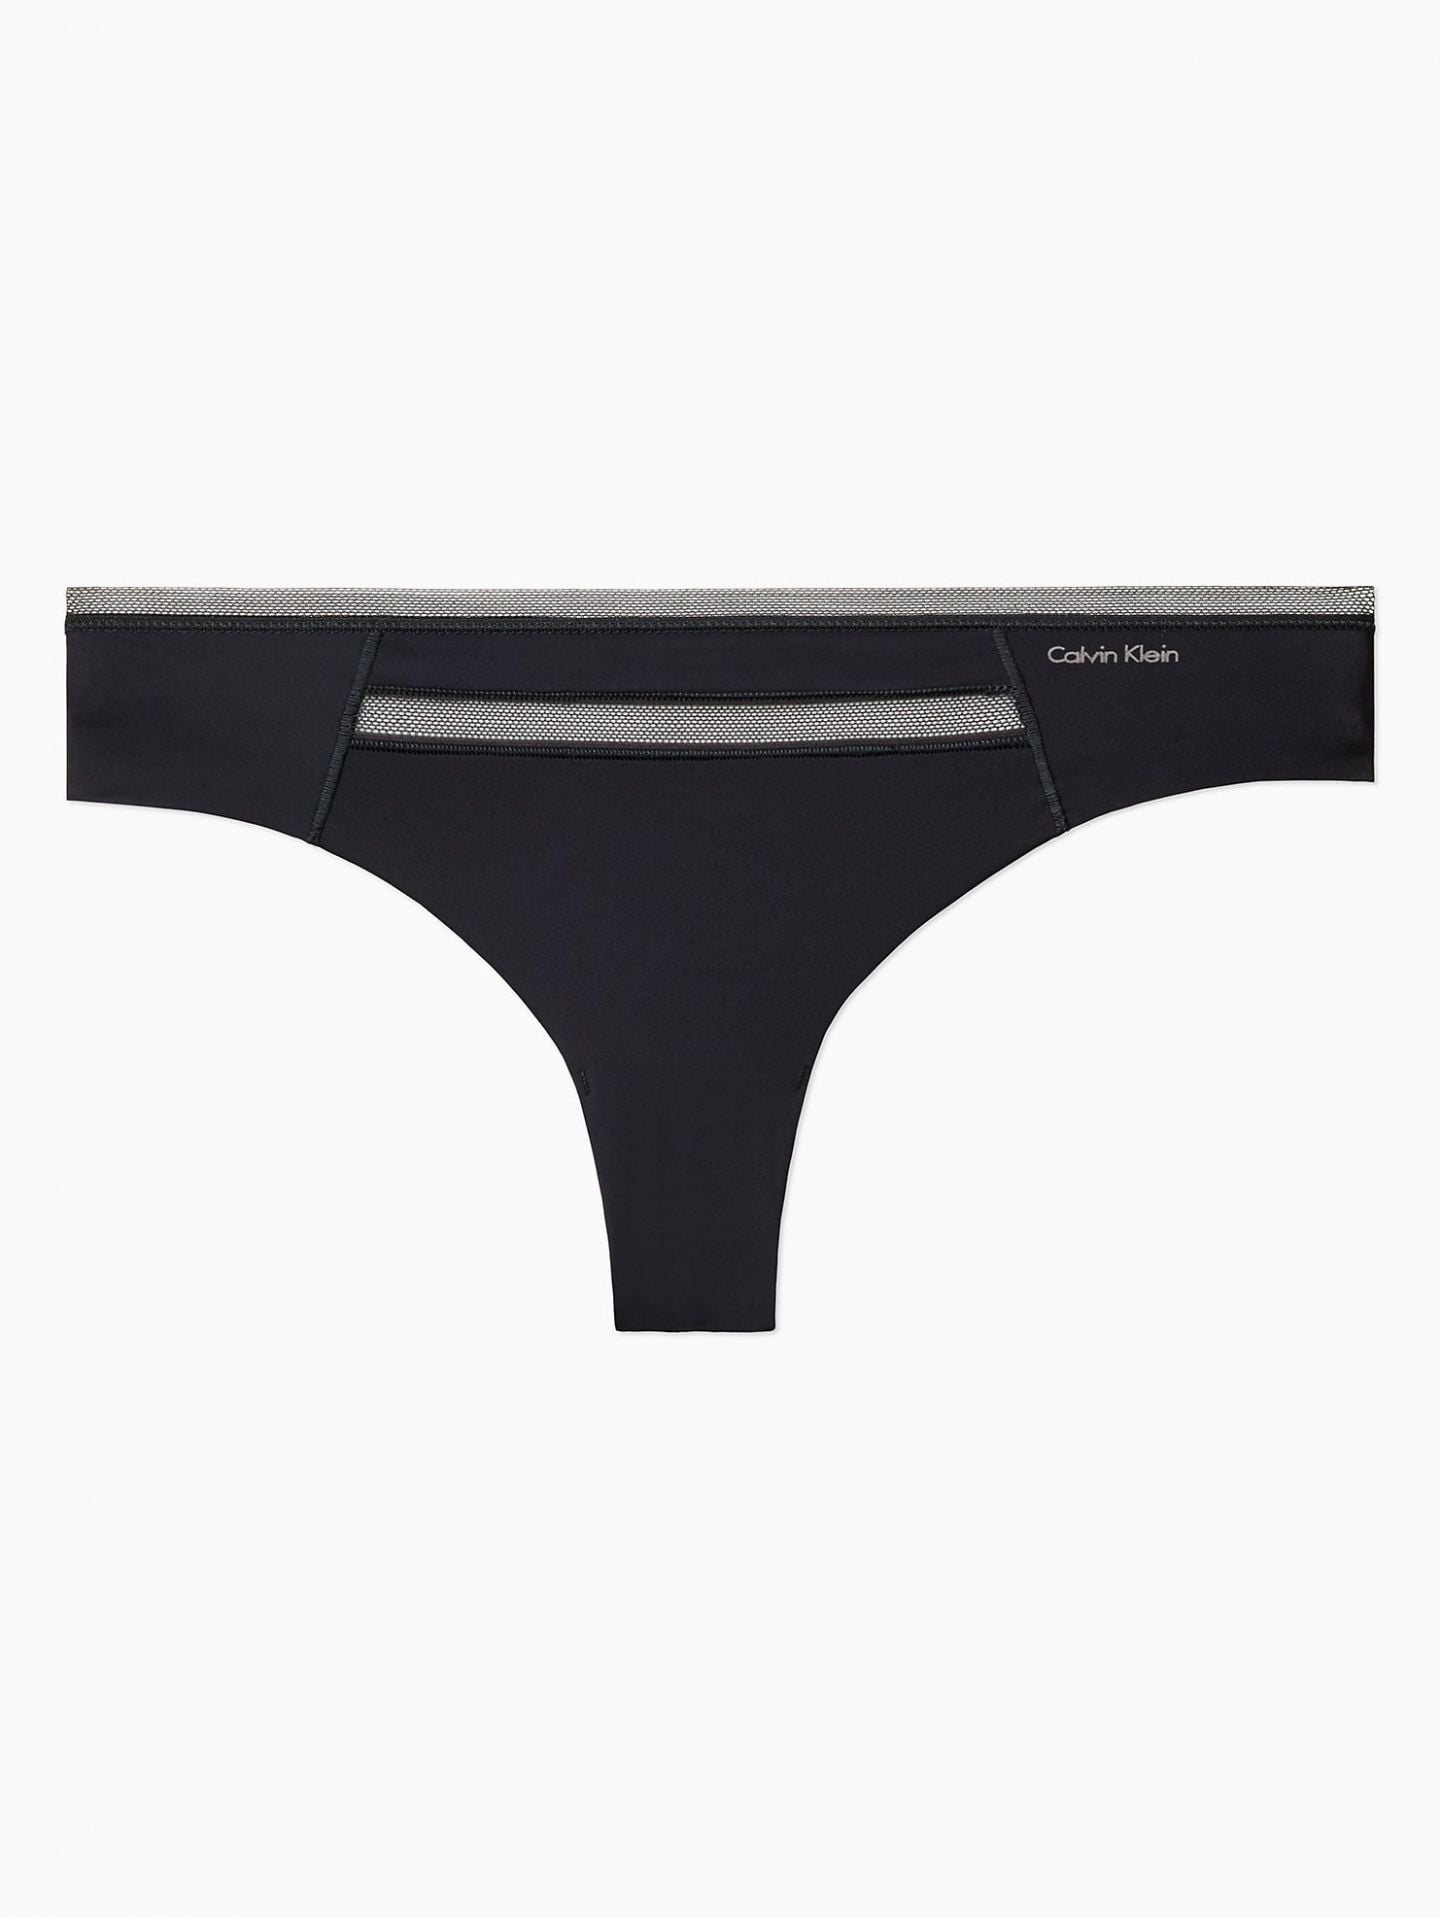 Calvin Klein Women's Invisibles with Mesh Thong, Bare, X-Small 